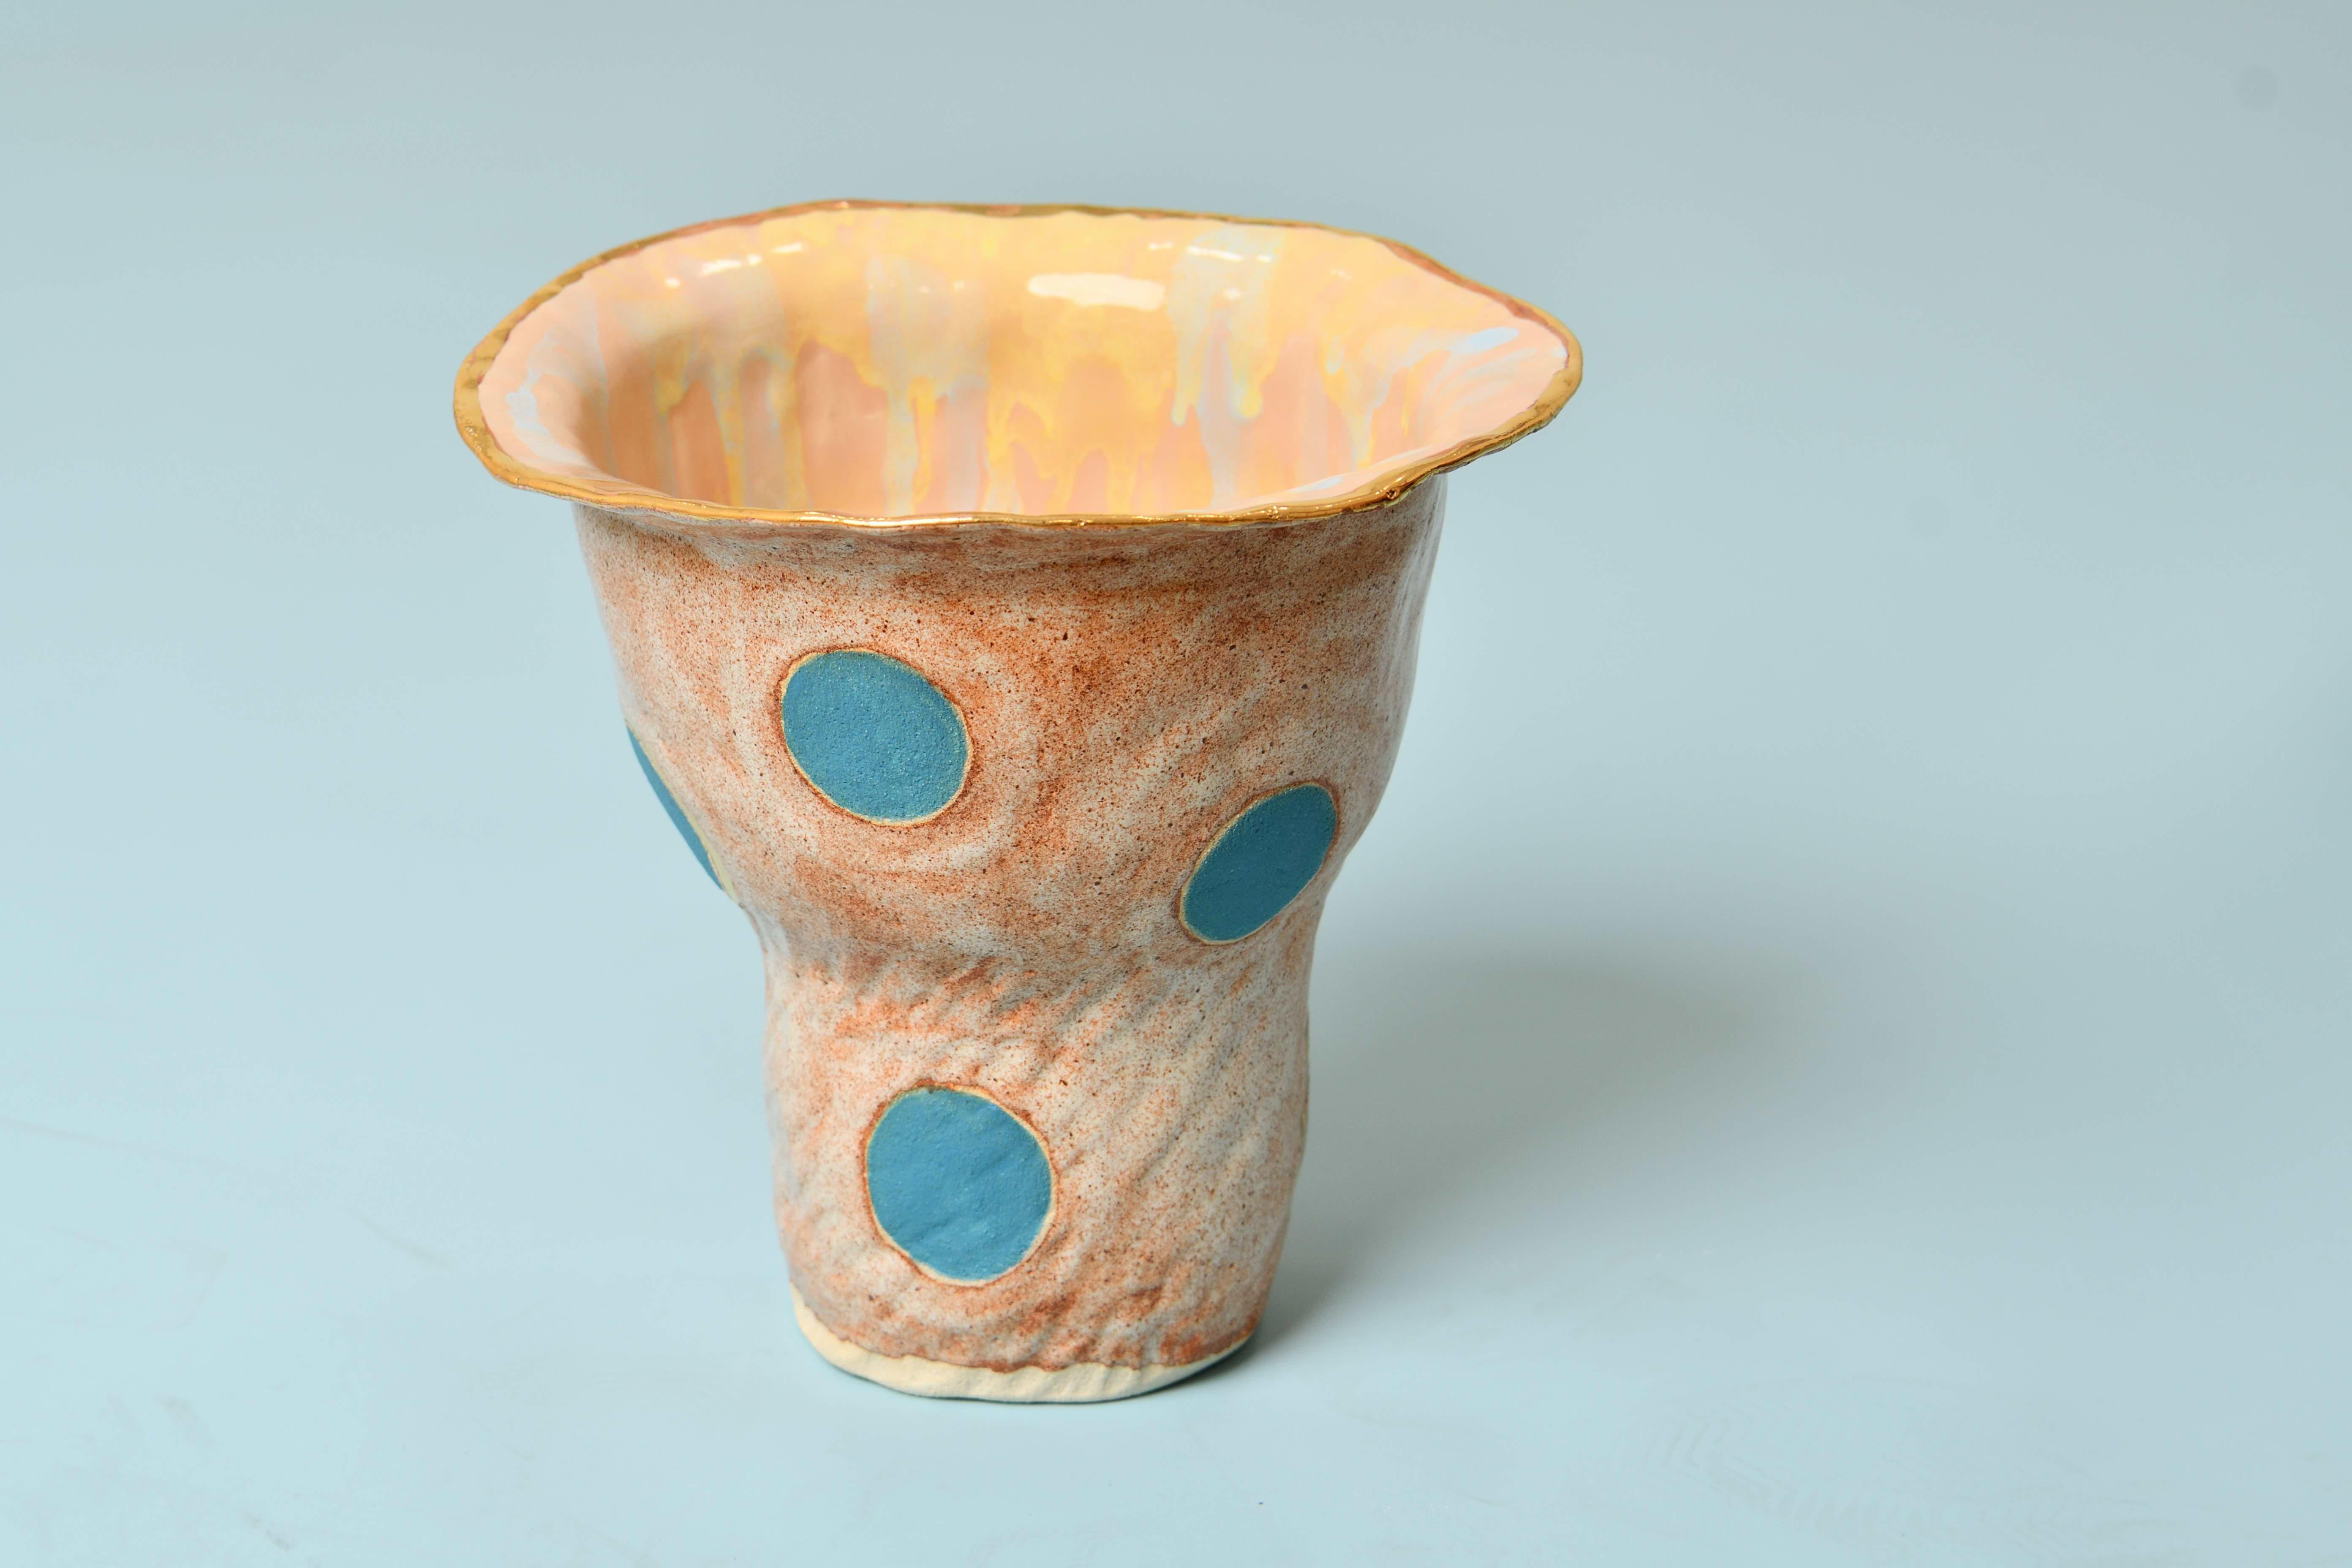 Olé 2 Vase by Hania Jneid
Unique Piece.
Dimensions: Ø 17 x H 23 cm
Materials: Stoneware, glaze and gold luster.

Numbered Olé Vase in the collection Olé, a tribute to the Flamenco culture. Color: Beige, blue Dots, Gold enamel. Built and glazed by